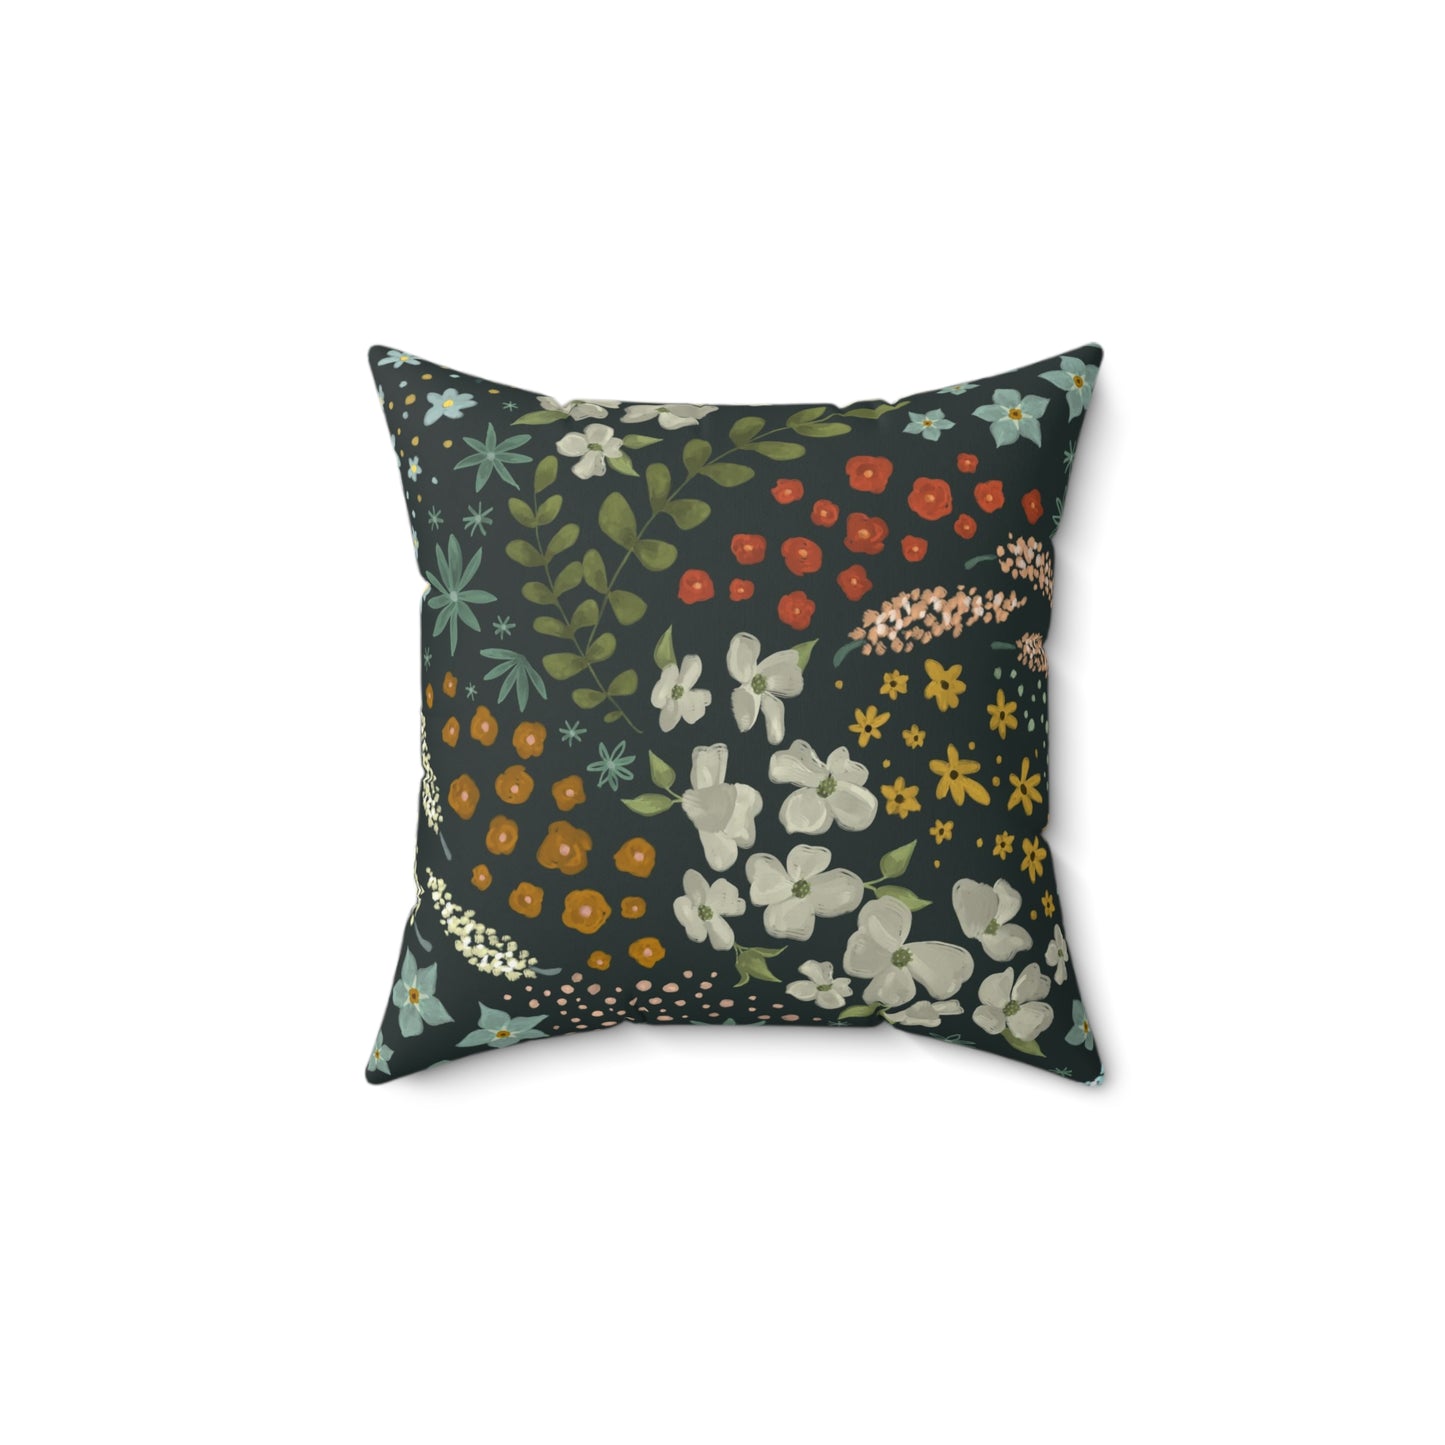 Dark Floral Square Pillow